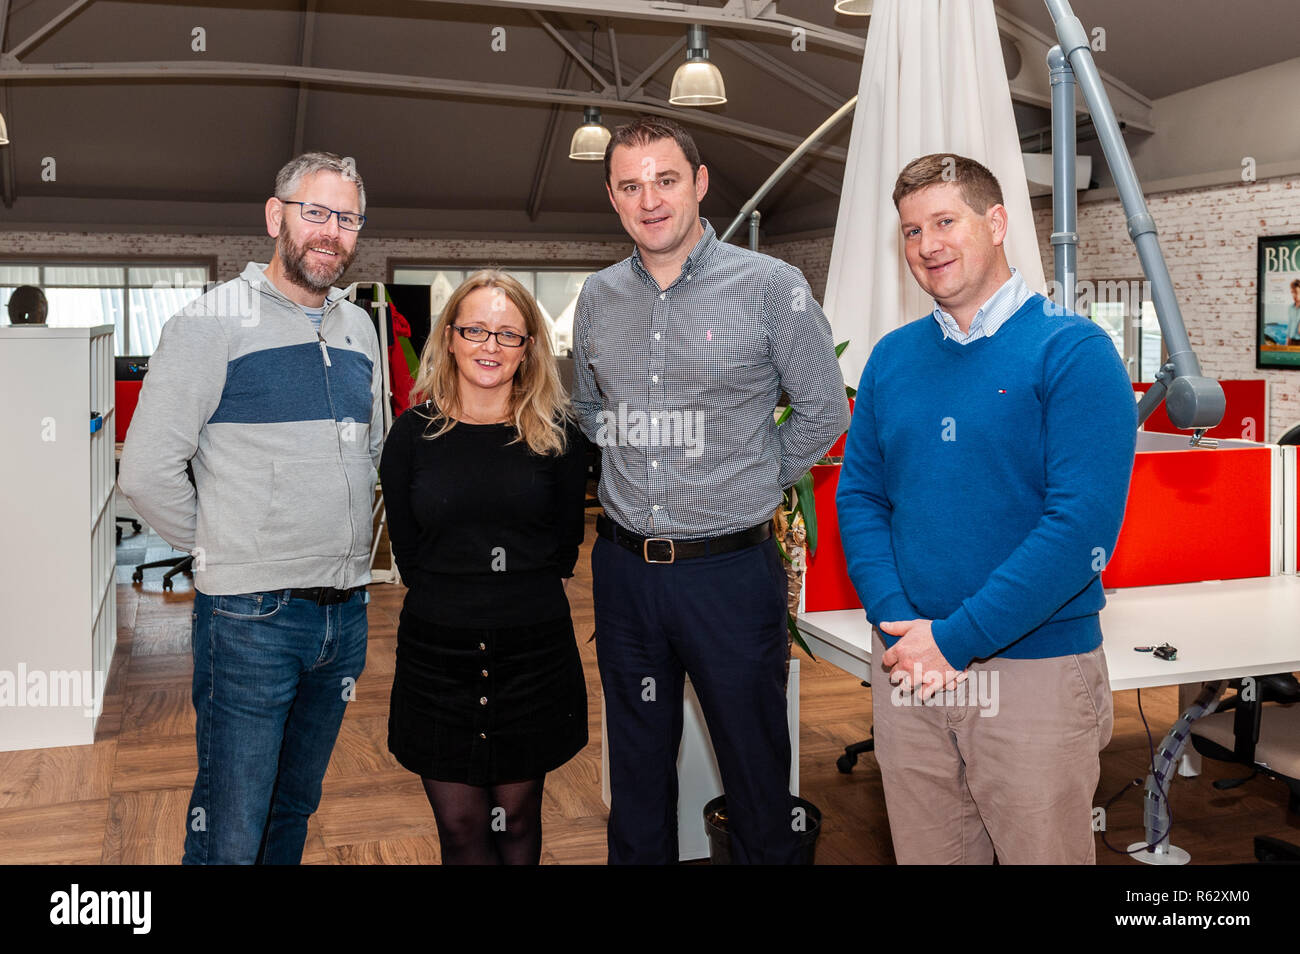 Skibbereen, West Cork, Ireland. 3rd Dec, 2018. Ludgate Hub is celebrating today as it has received €2million in funding, which will be spent on creating 390 jobs across West Cork. The Ludgate Hub is a not for profit company which provides office space and single desks for small companies and start-ups. At the facility this morning were: Oliver Farrell, Board Member; Elma Connolly, Ludgate Hub; Adam Walsh, Board Member and Kevin Buckley, Board Member. Credit: Andy Gibson/Alamy Live News. Stock Photo